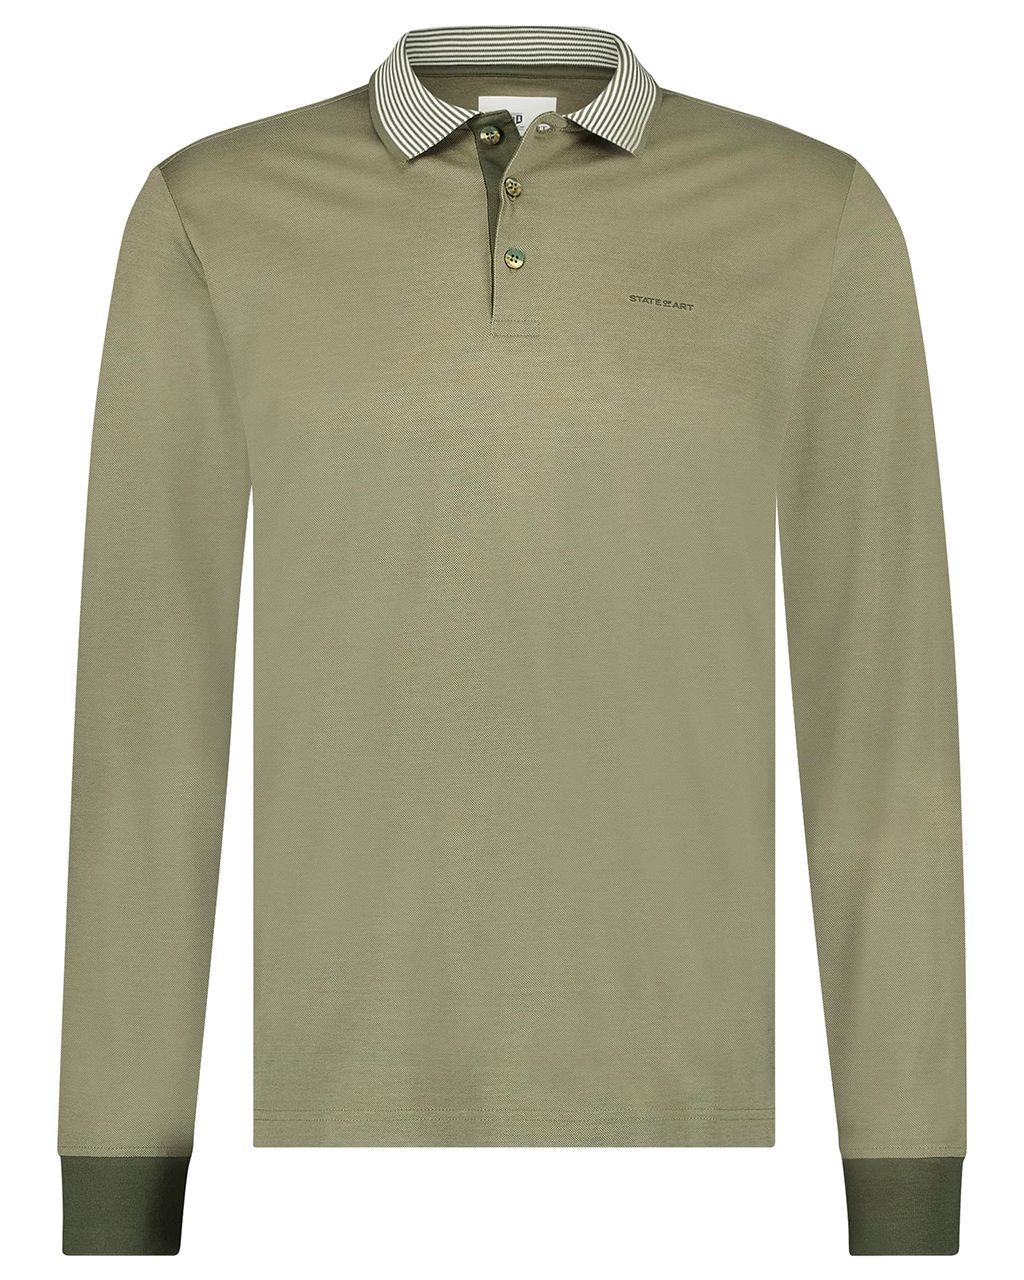 State of Art Polo LM Groen 075869-001-4XL